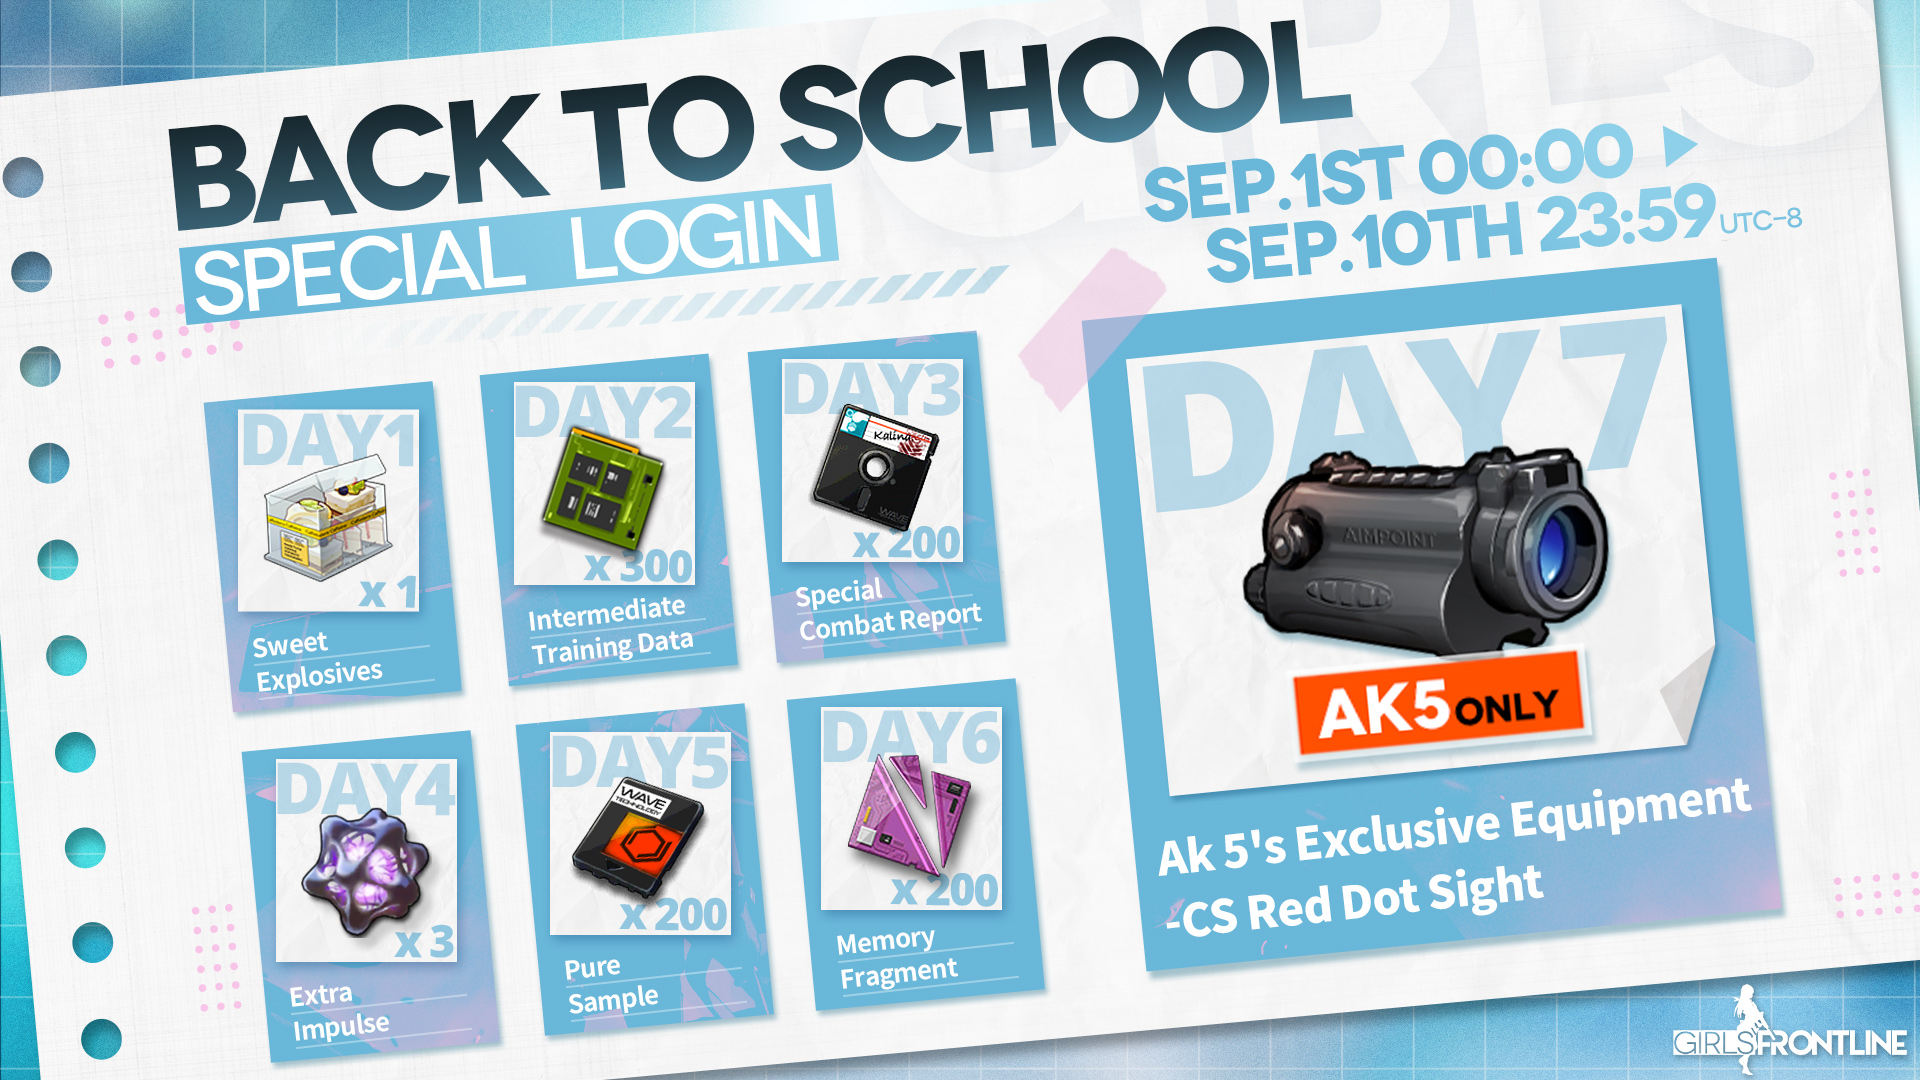 Girls' Frontline-EN on Twitter: "Dear Commanders, We will be having a special login event "Back School" which will commence Sep. 1st! Log into the game for seven days to